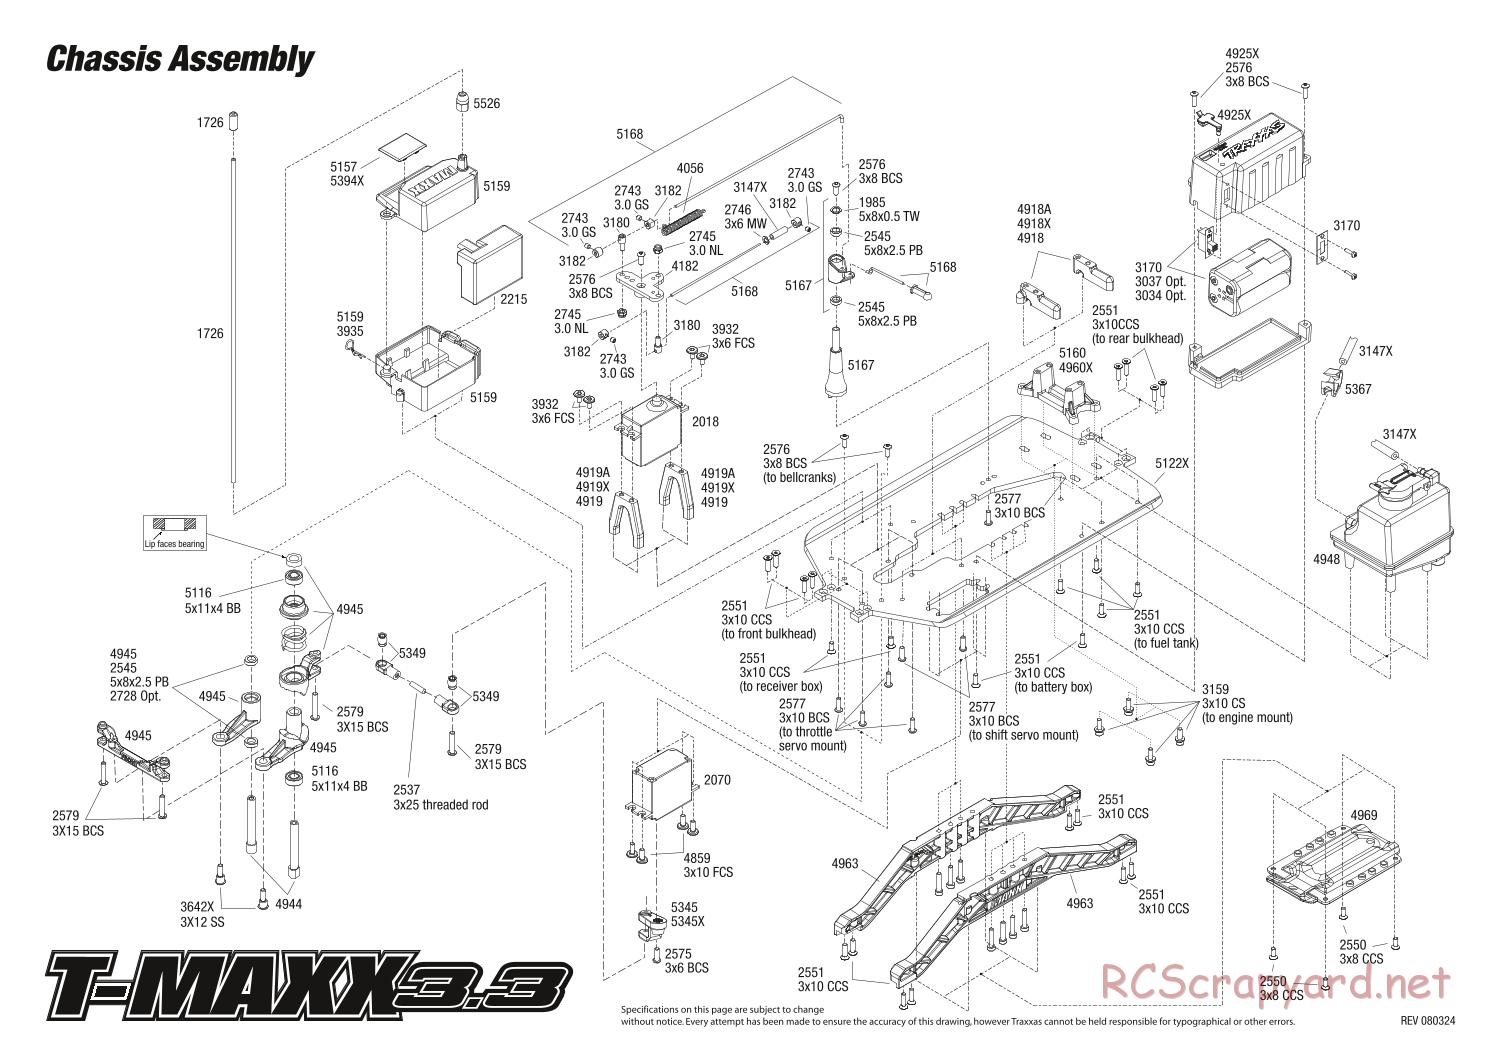 Traxxas - T-Maxx 3.3 (2008) - Exploded Views - Page 1